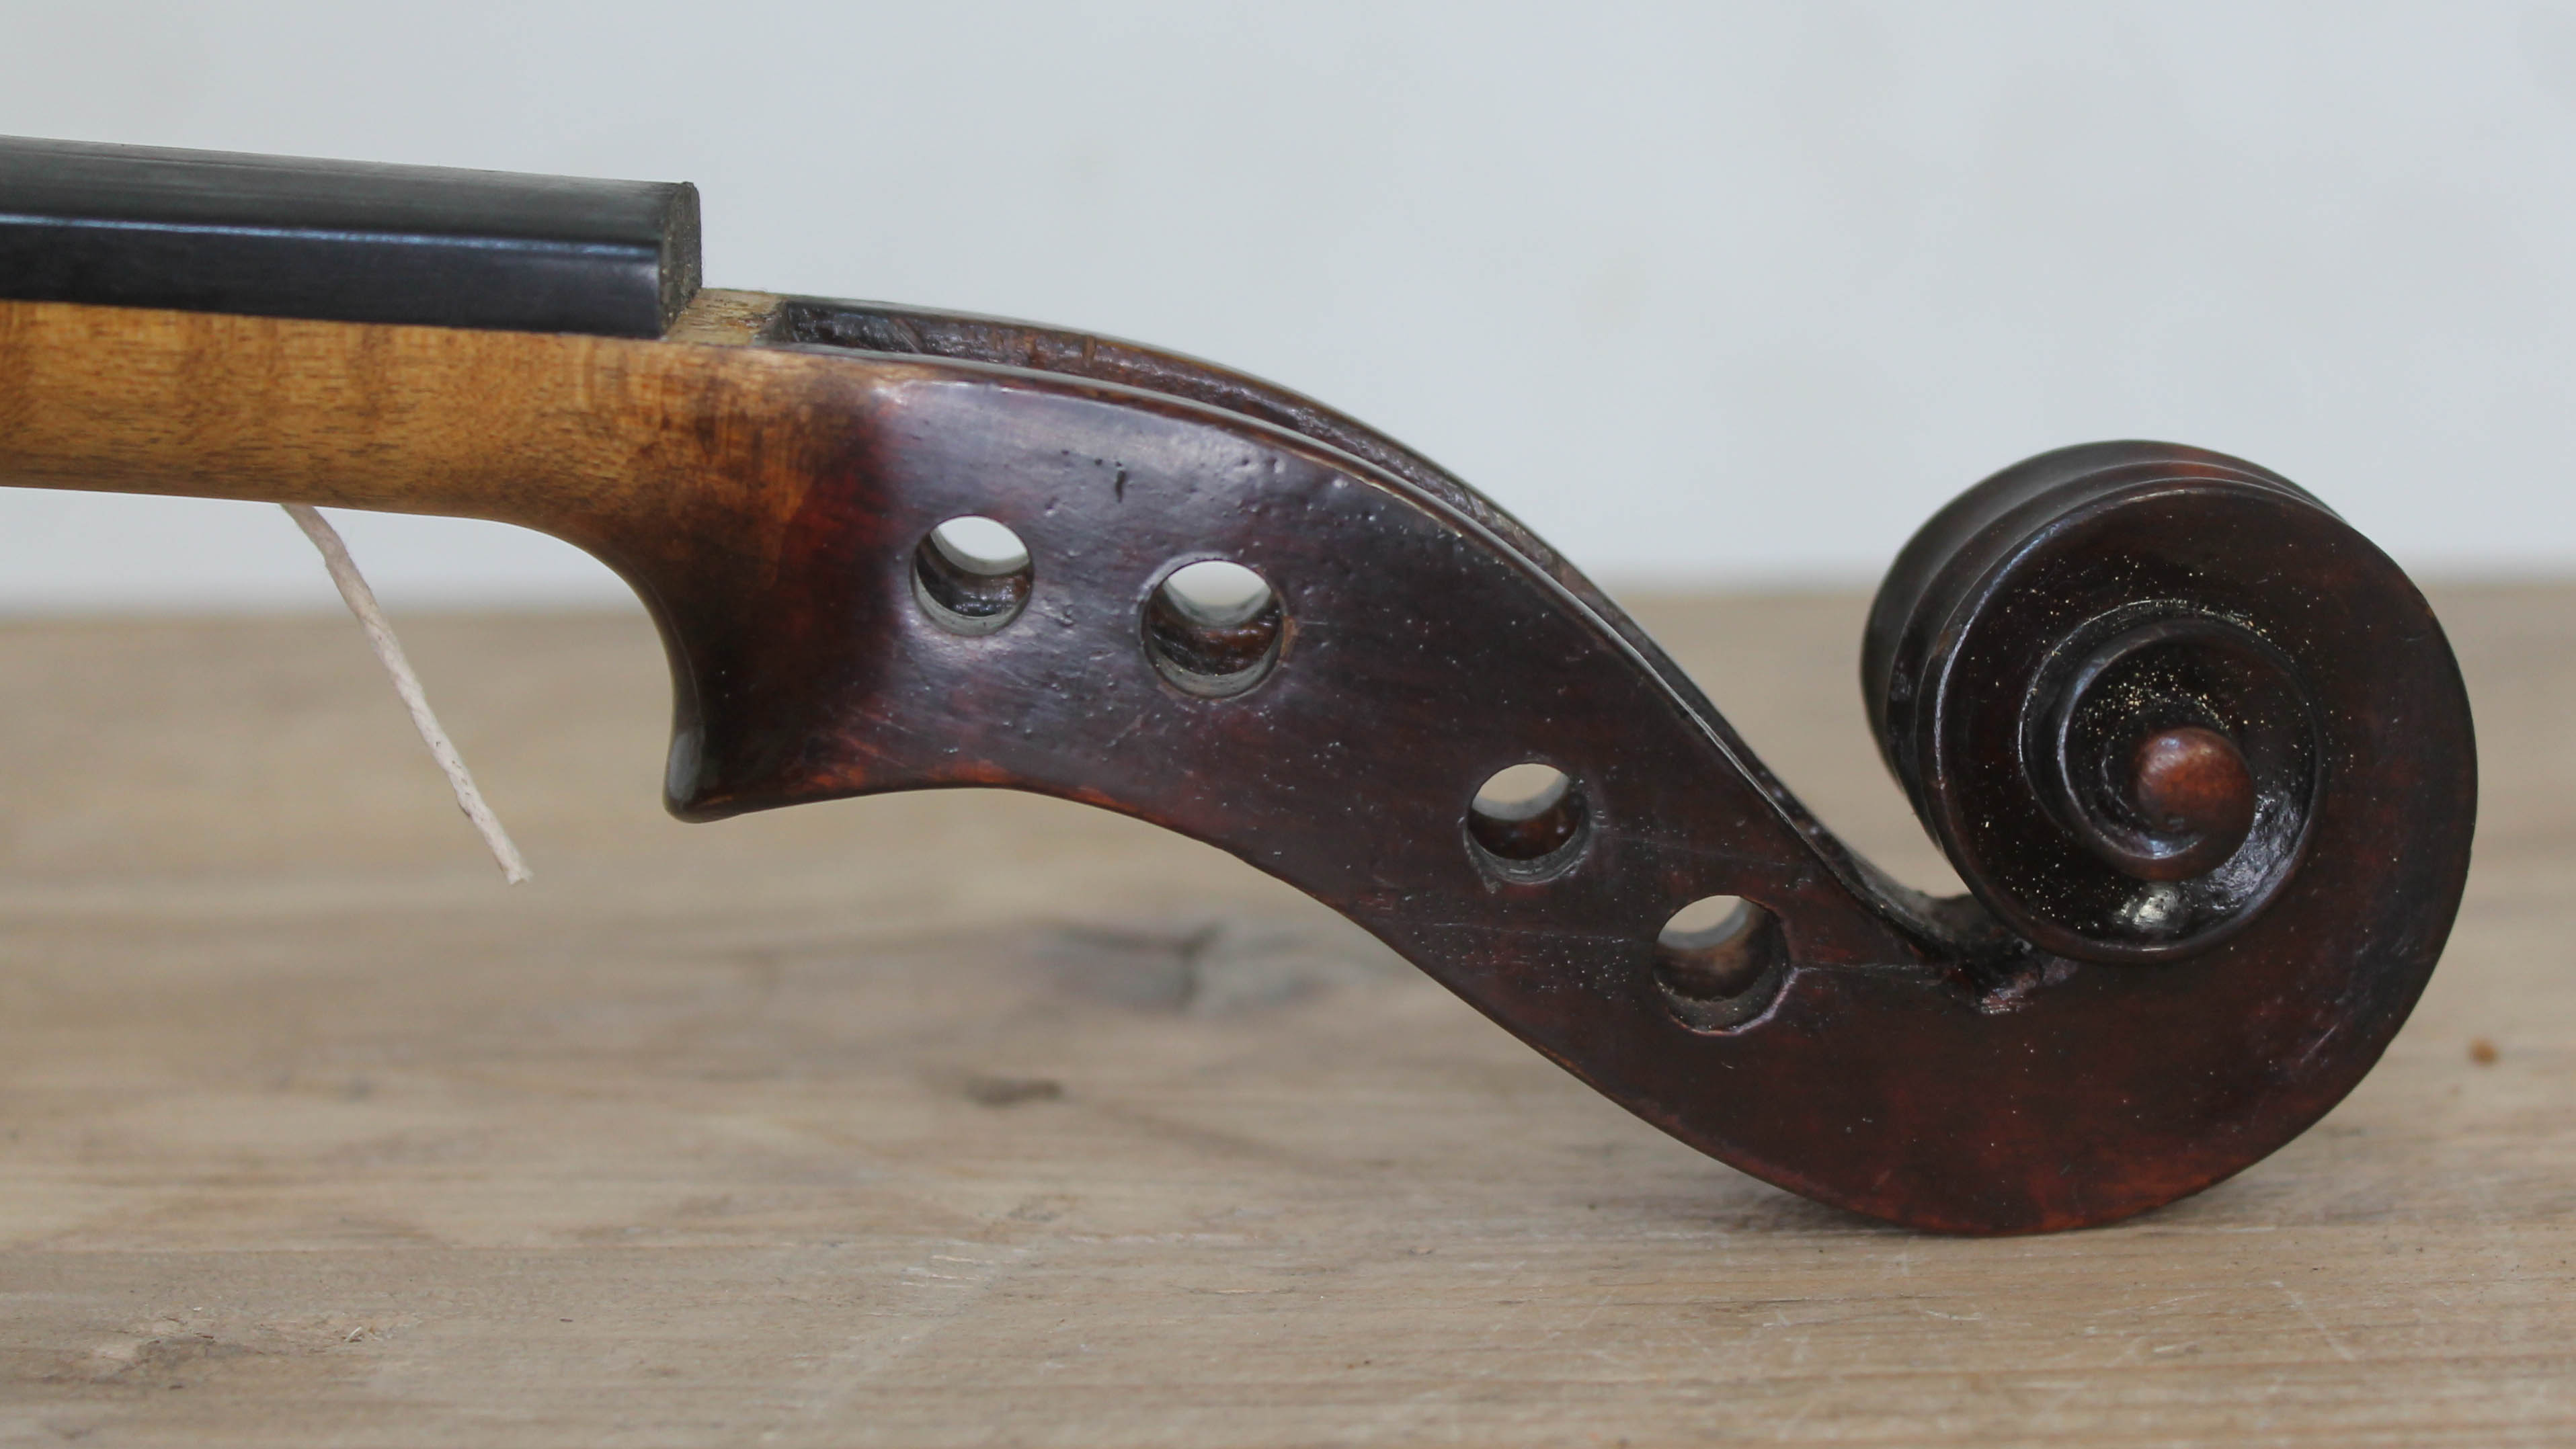 A 19th century violin by Dearlove, one piece back, length 362mm, labelled 'J Dearlove Violin Maker - Image 3 of 4